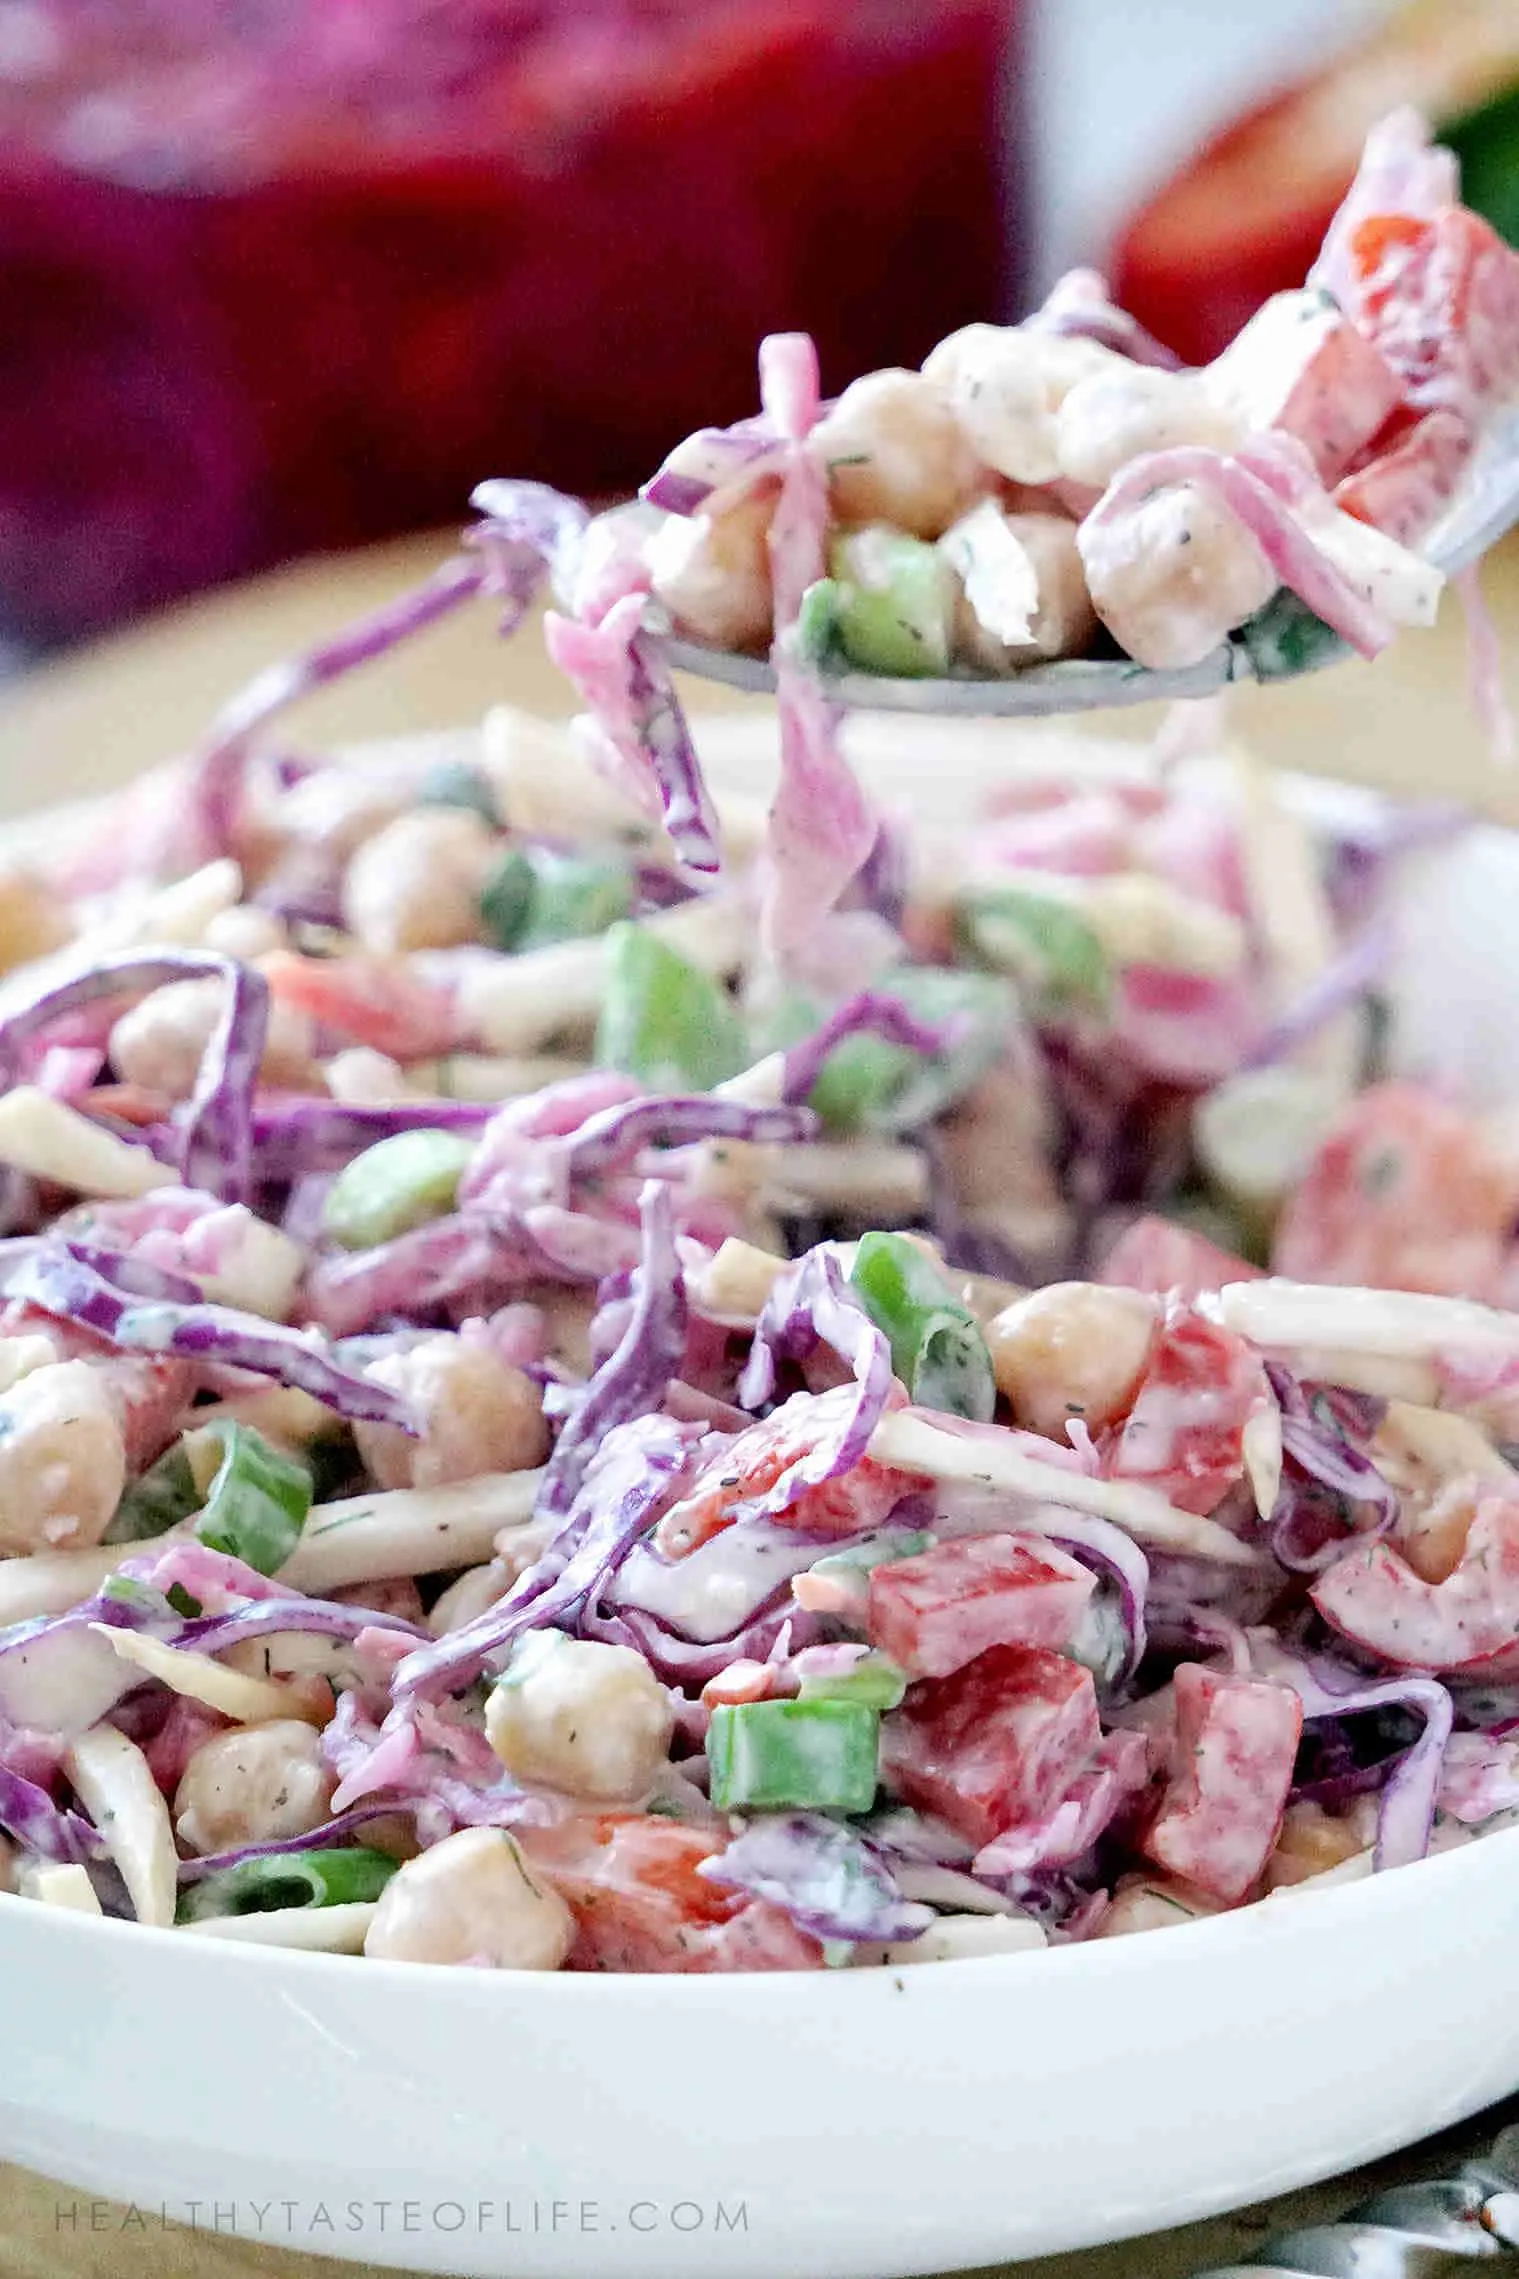 Creamy garbanzo bean salad with cabbage, celery root, bell peppers, onion and a creamy ranch dressing - all vegan.